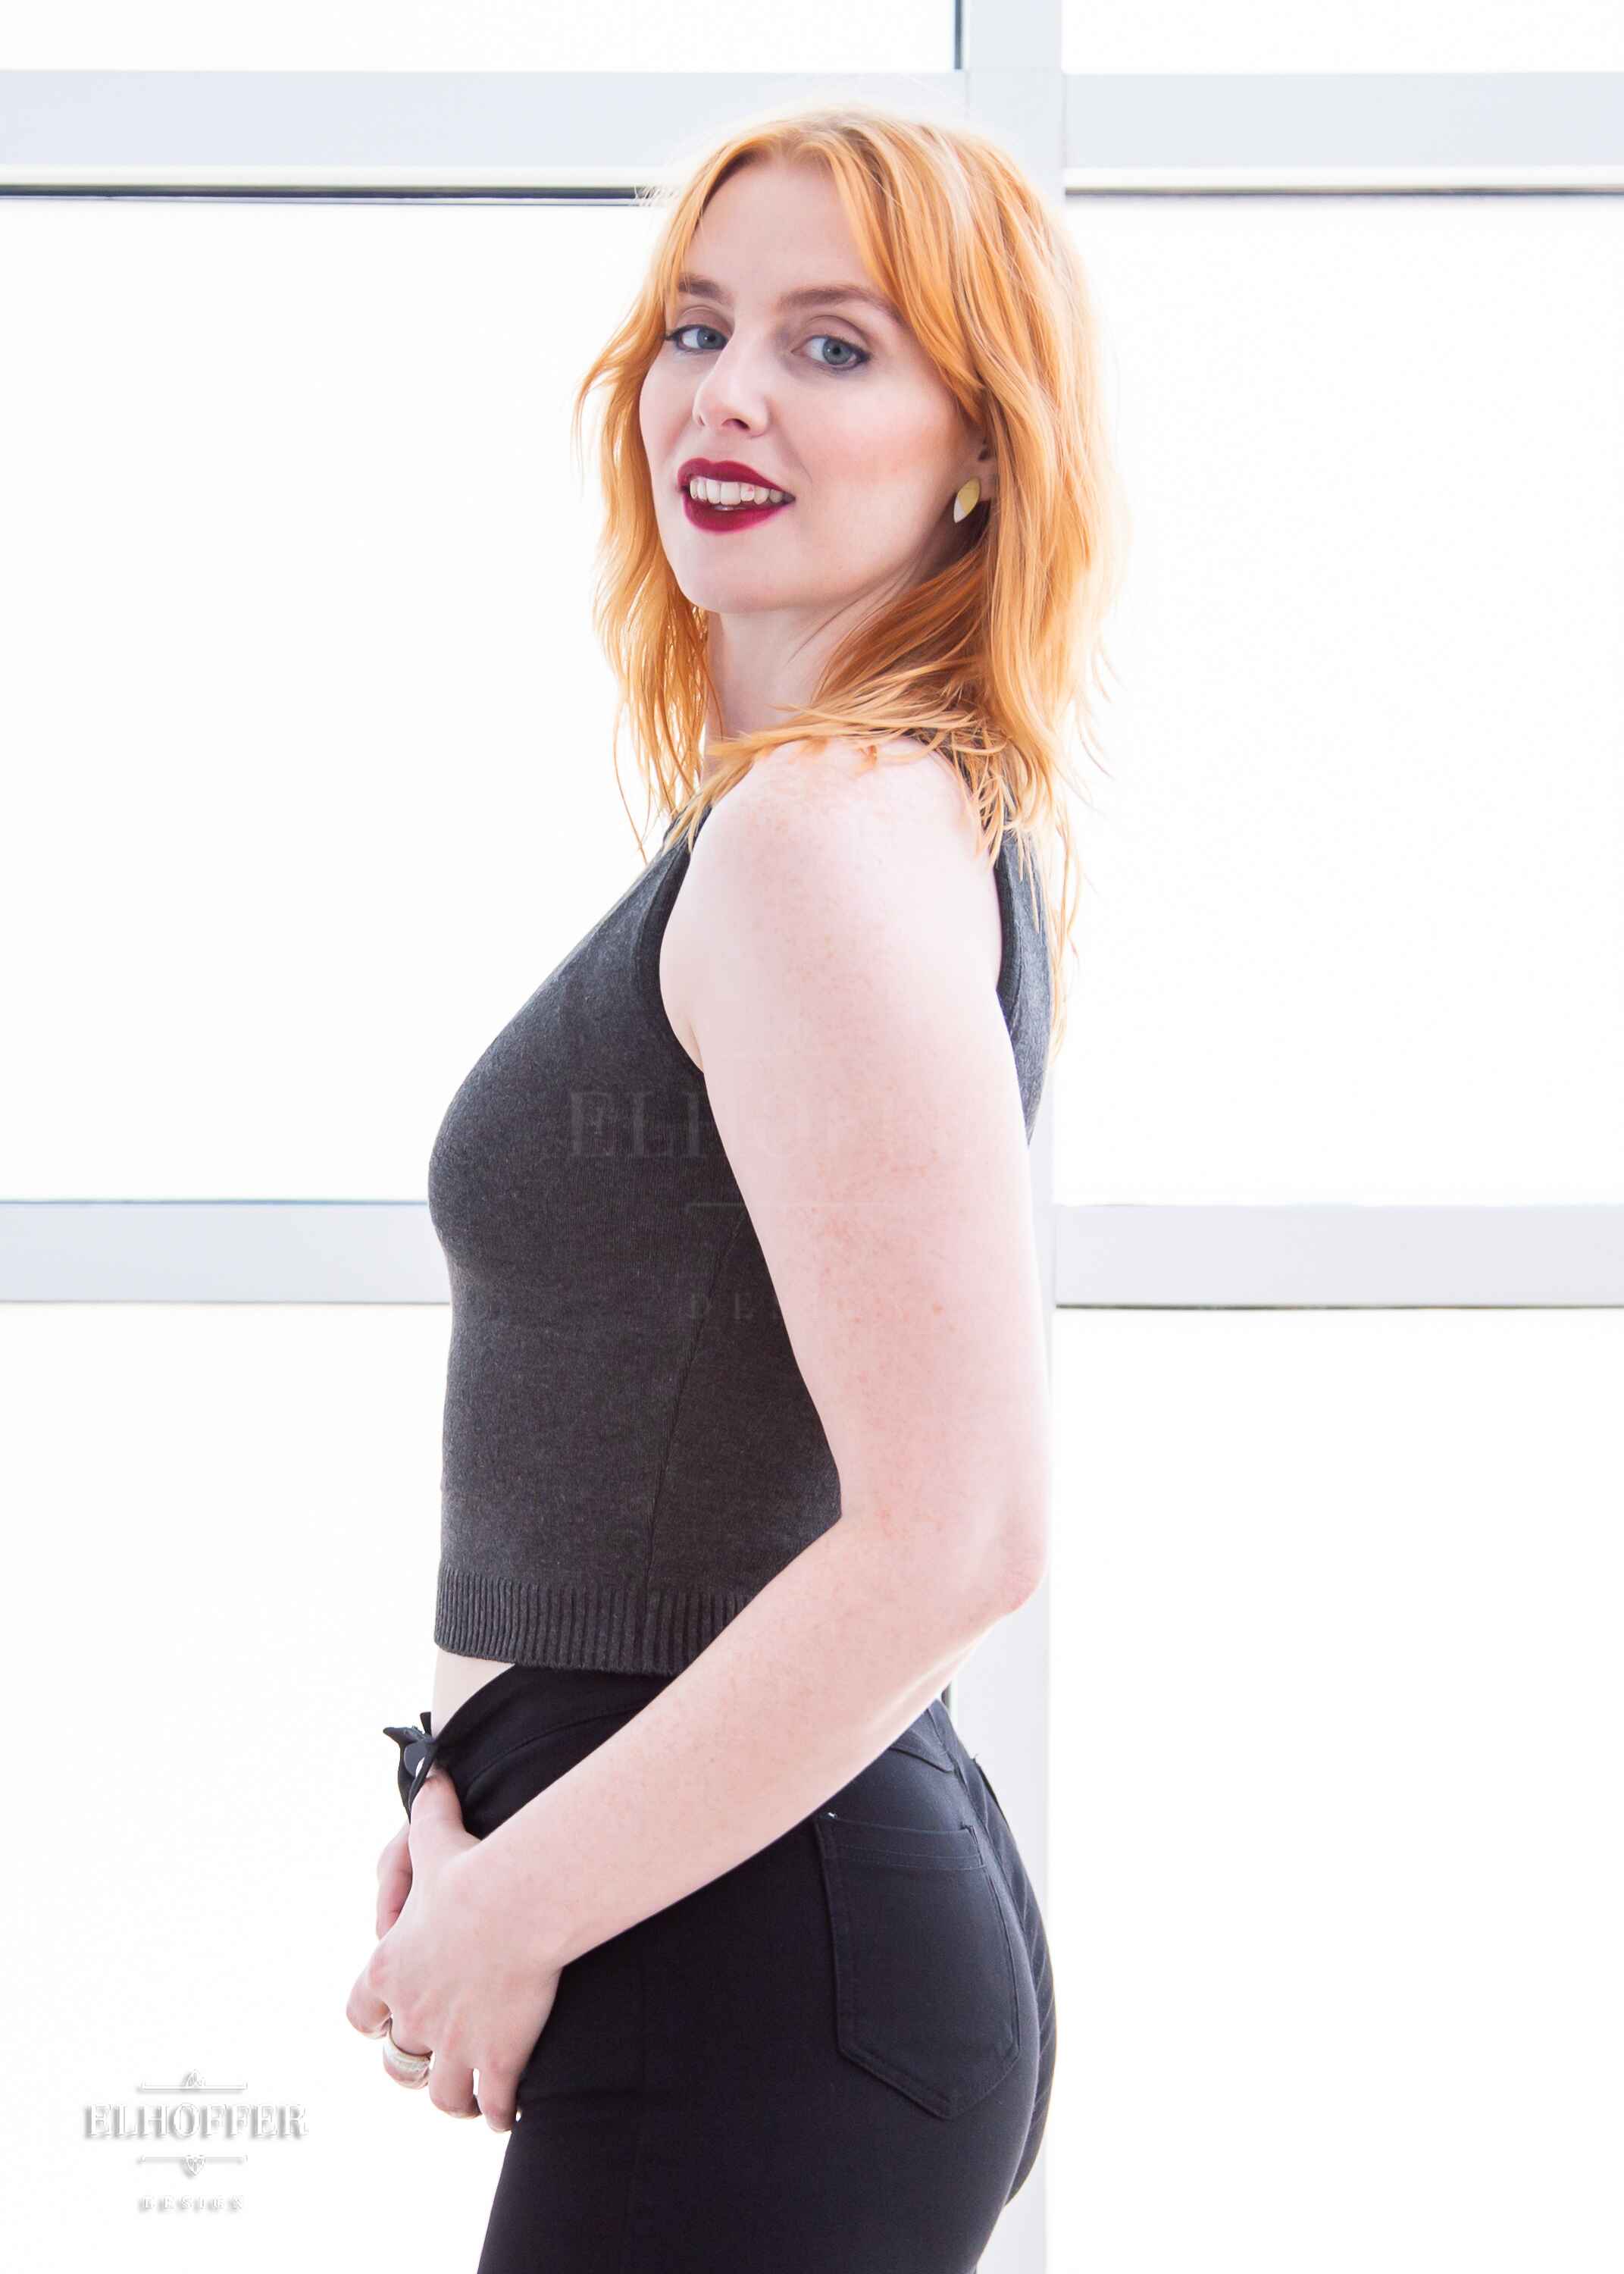 A side view of Harley, a fair skinned S model with shoulder length strawberry blonde hair, wearing a dark grey sleeveless knit crop top with a large subtle ankh design on the front.